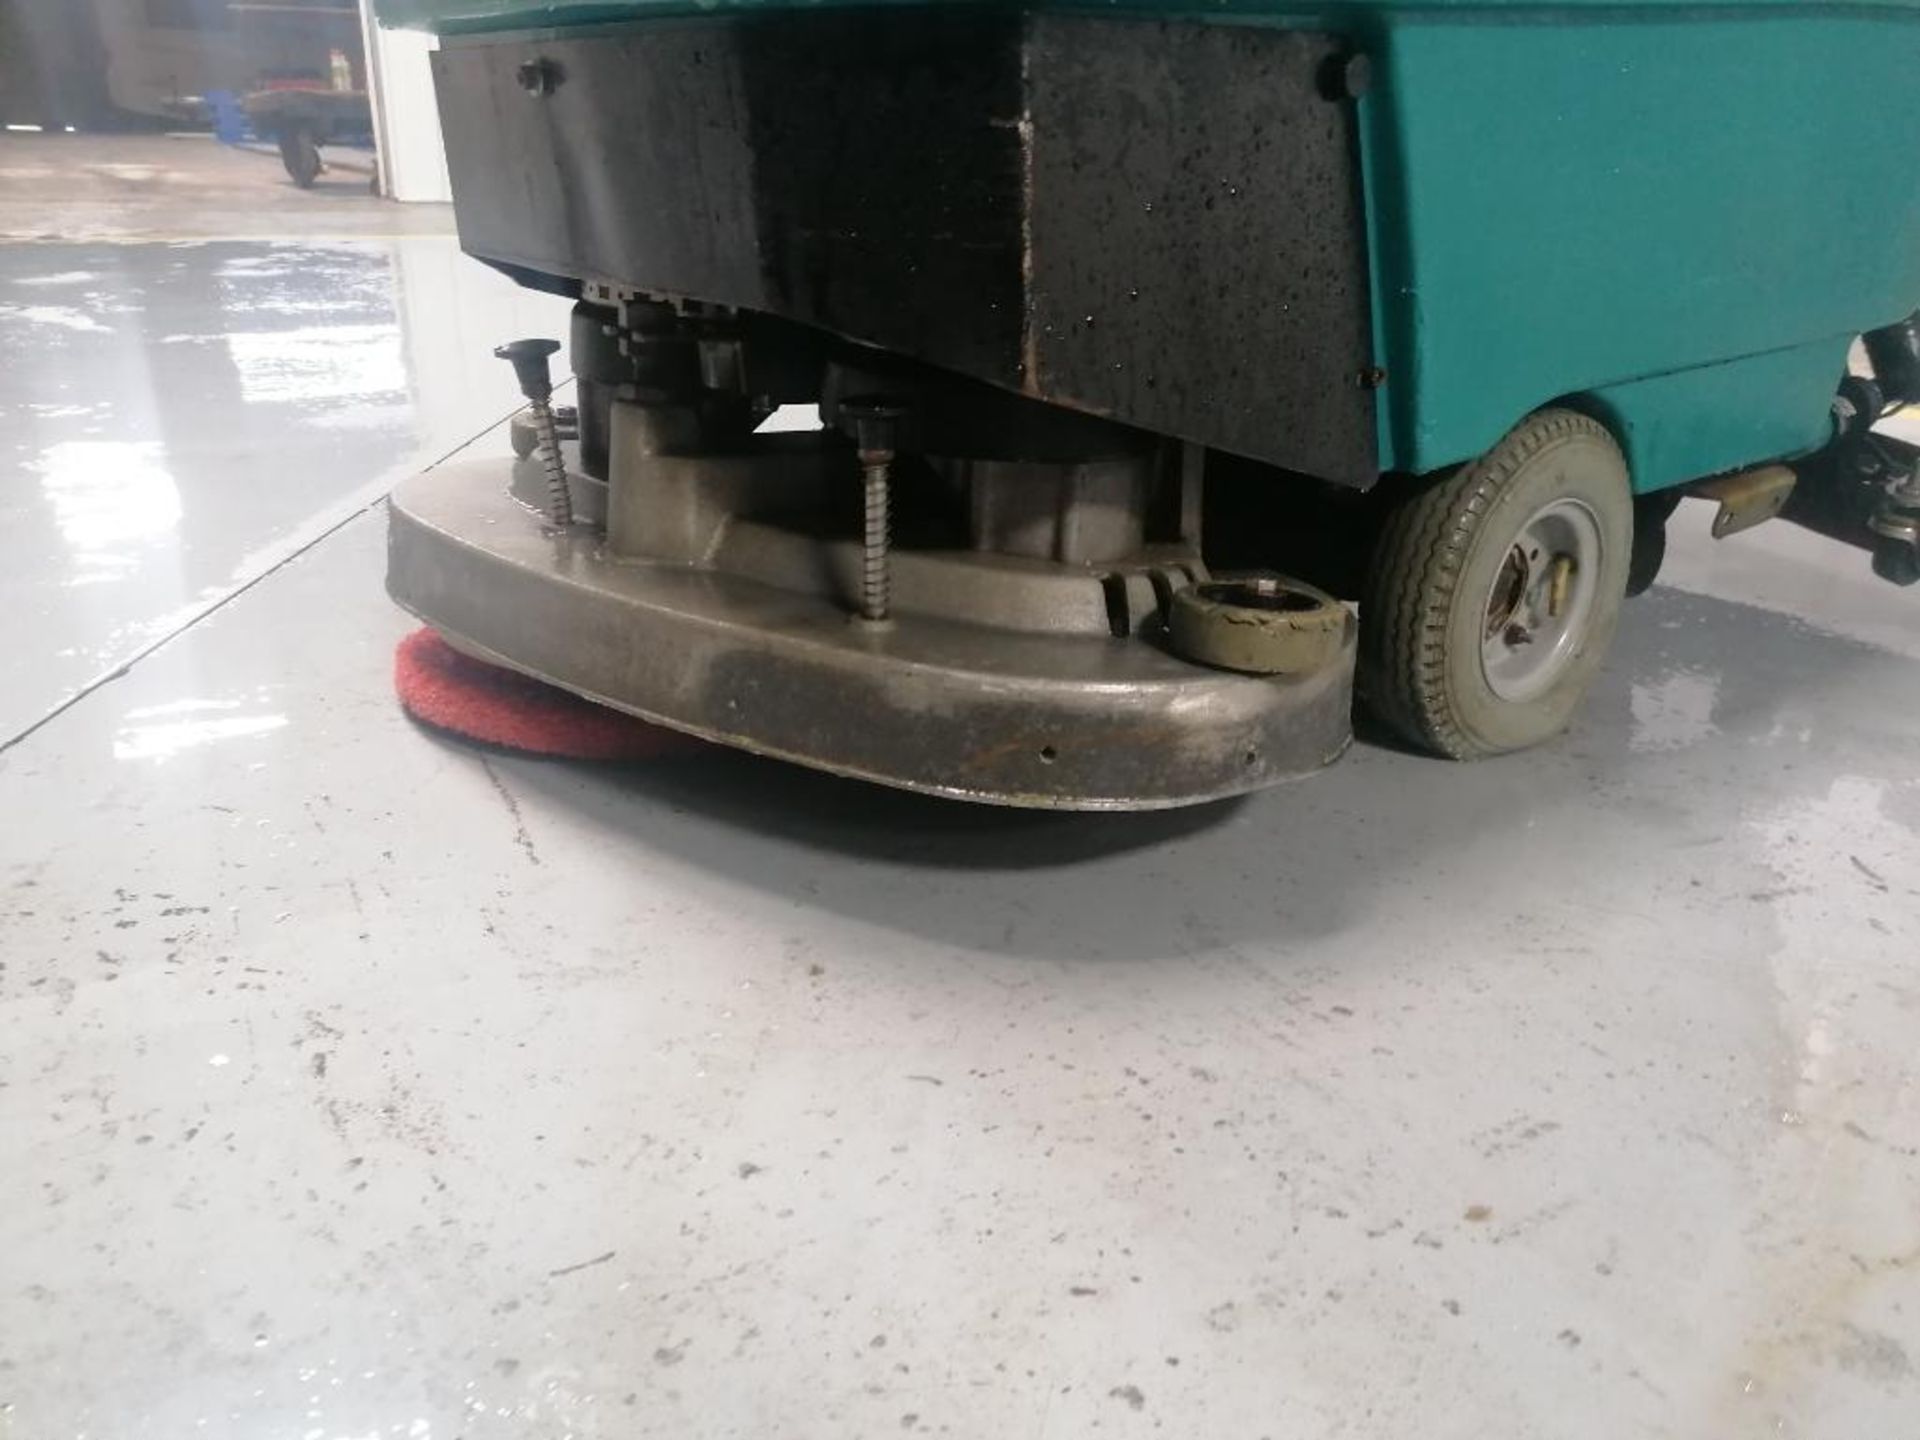 Tennant 5400 Floor Scrubber, Serial #540010229139 24 V, 21 Hours. Located in Mt. Pleasant, IA. - Image 9 of 19